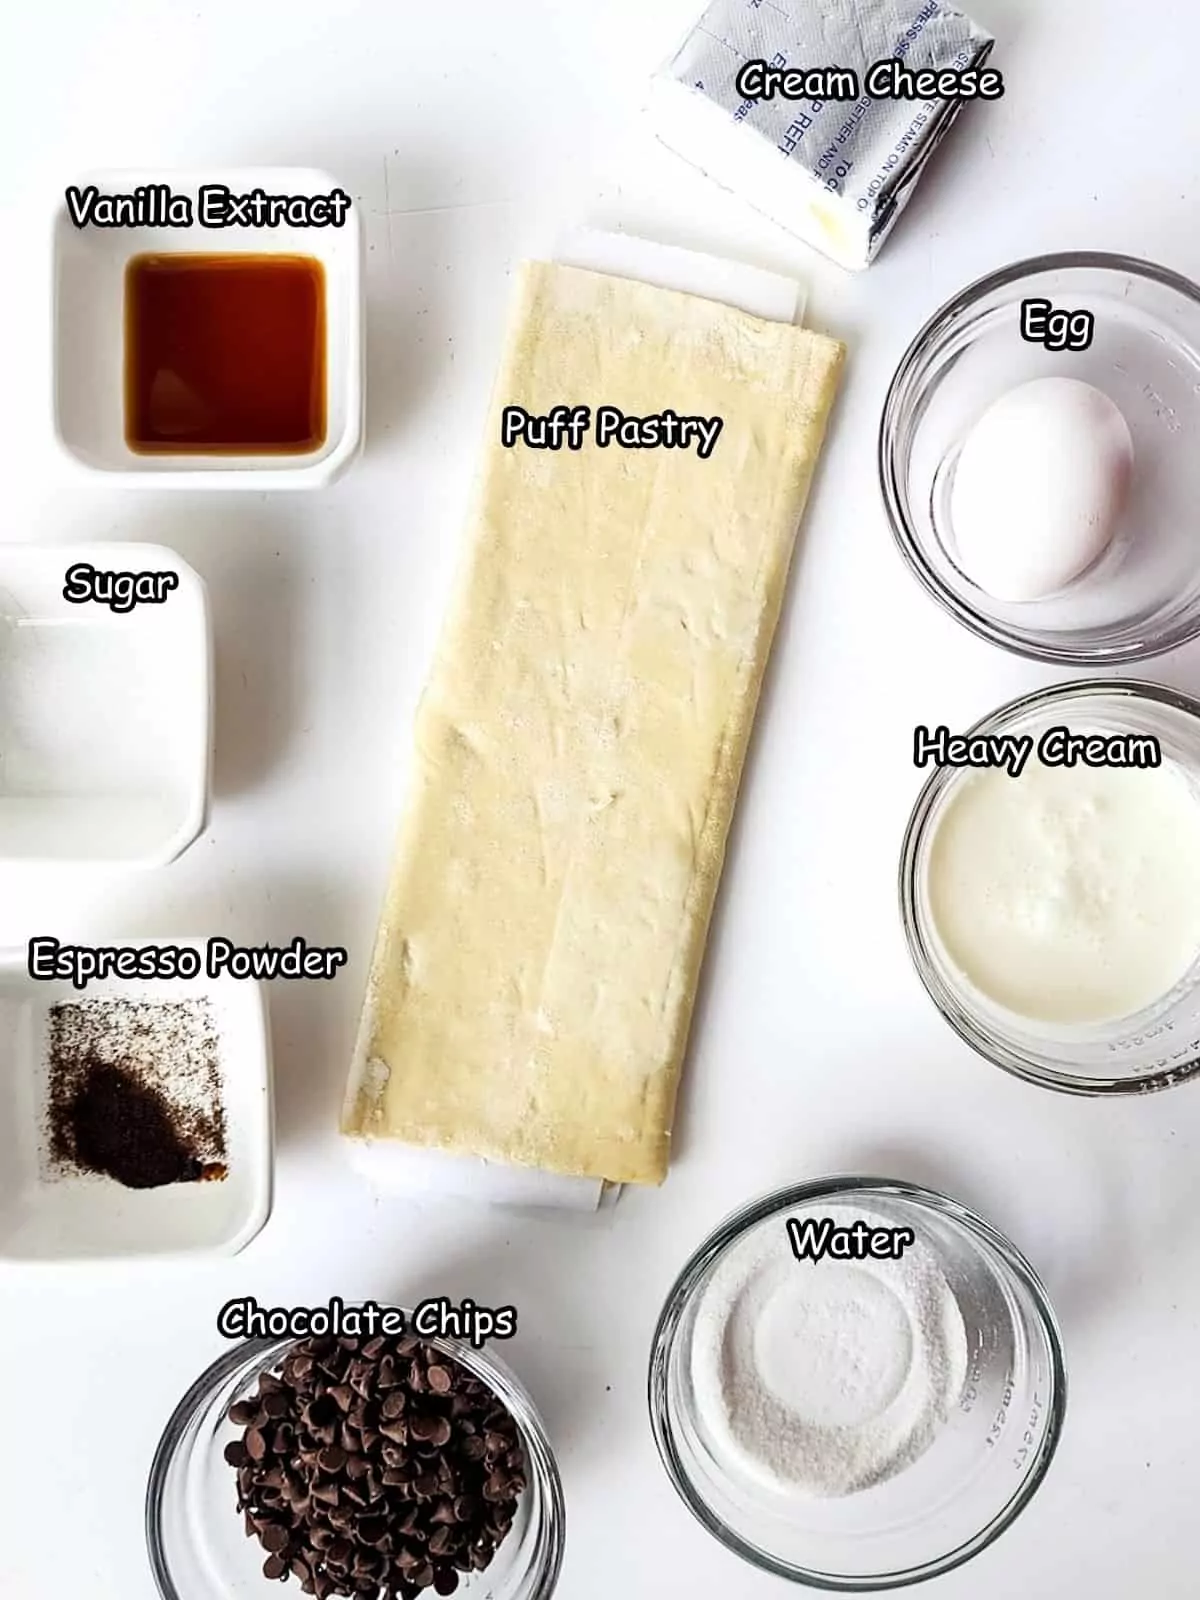 Ingredients for puff pastry chocolate cream cheese.